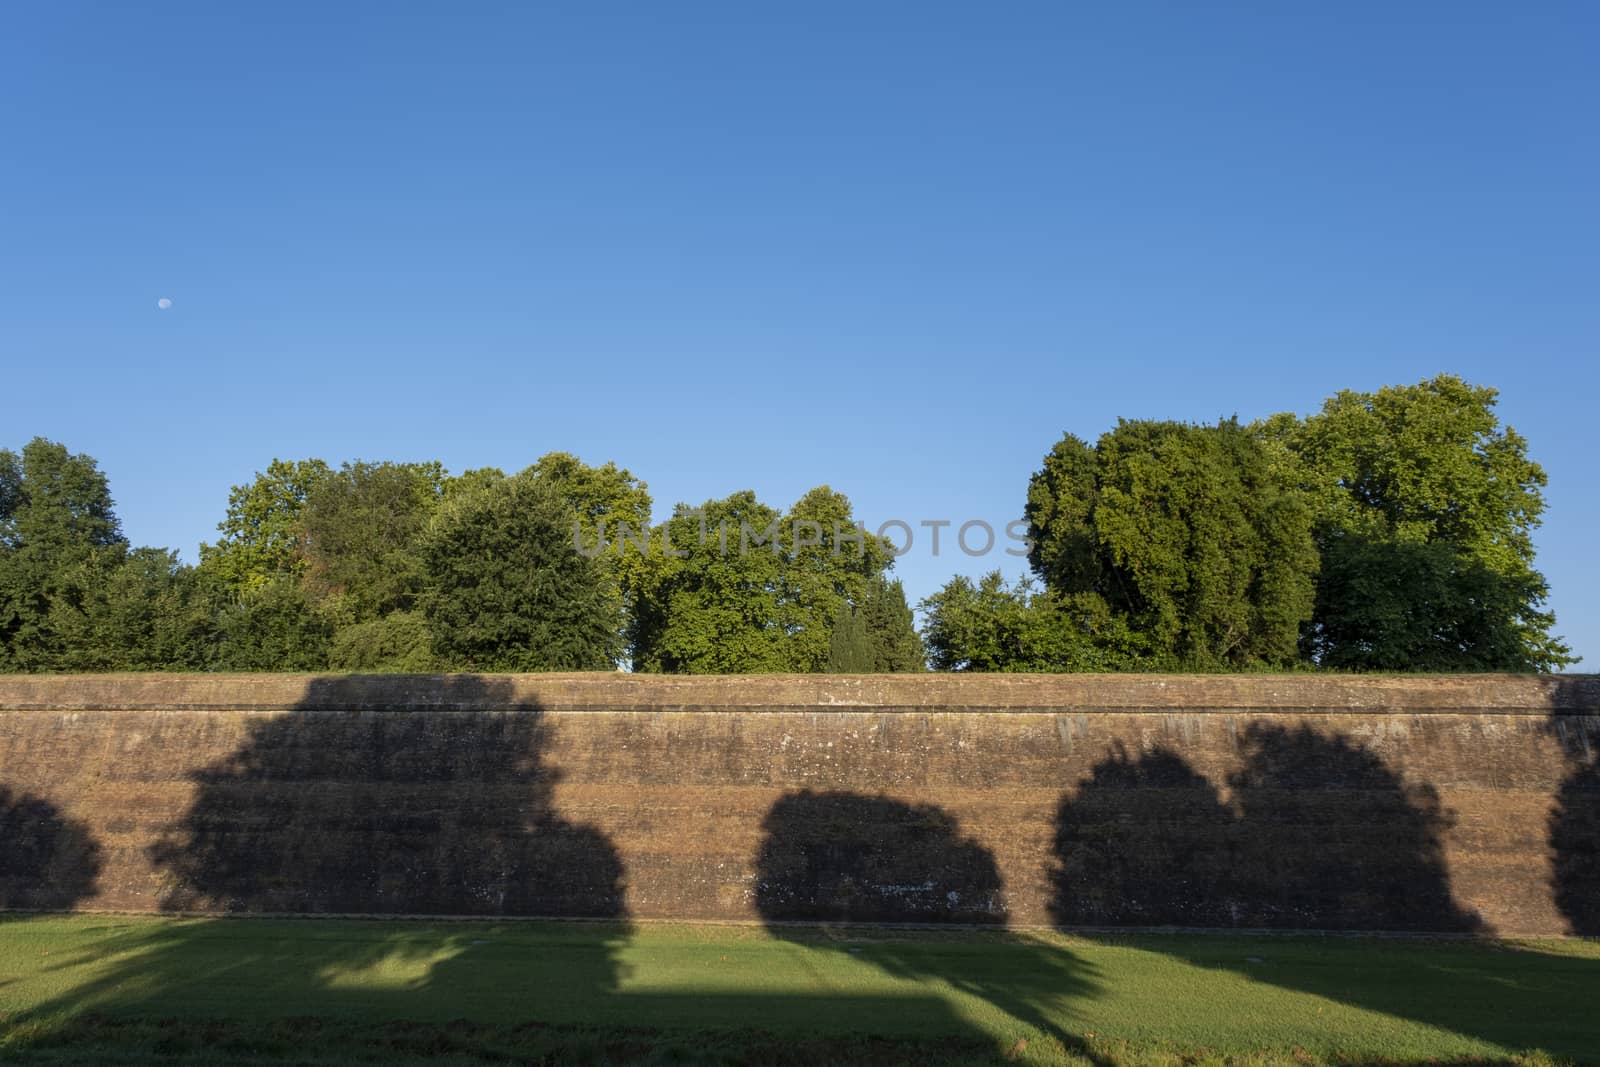 Scenic view of the exterior of the town walls of Lucca, 16-17th centuries, longer than 4 kilometers and perfectly preserved, in a sunny summer day, Lucca, Tuscany, Italy